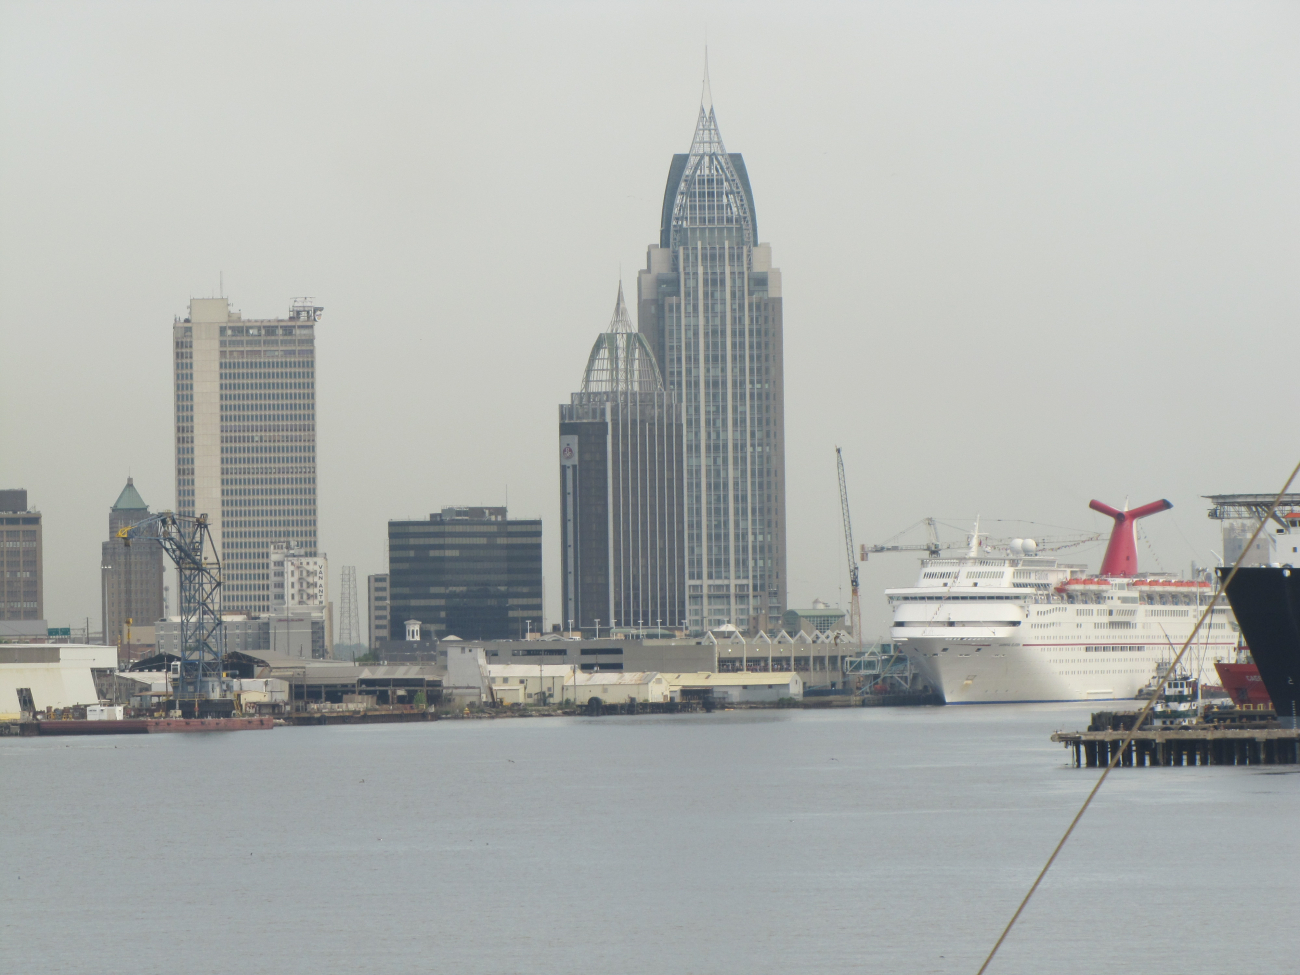 The cruise ship CARNIVAL ELATION tied up at Mobile